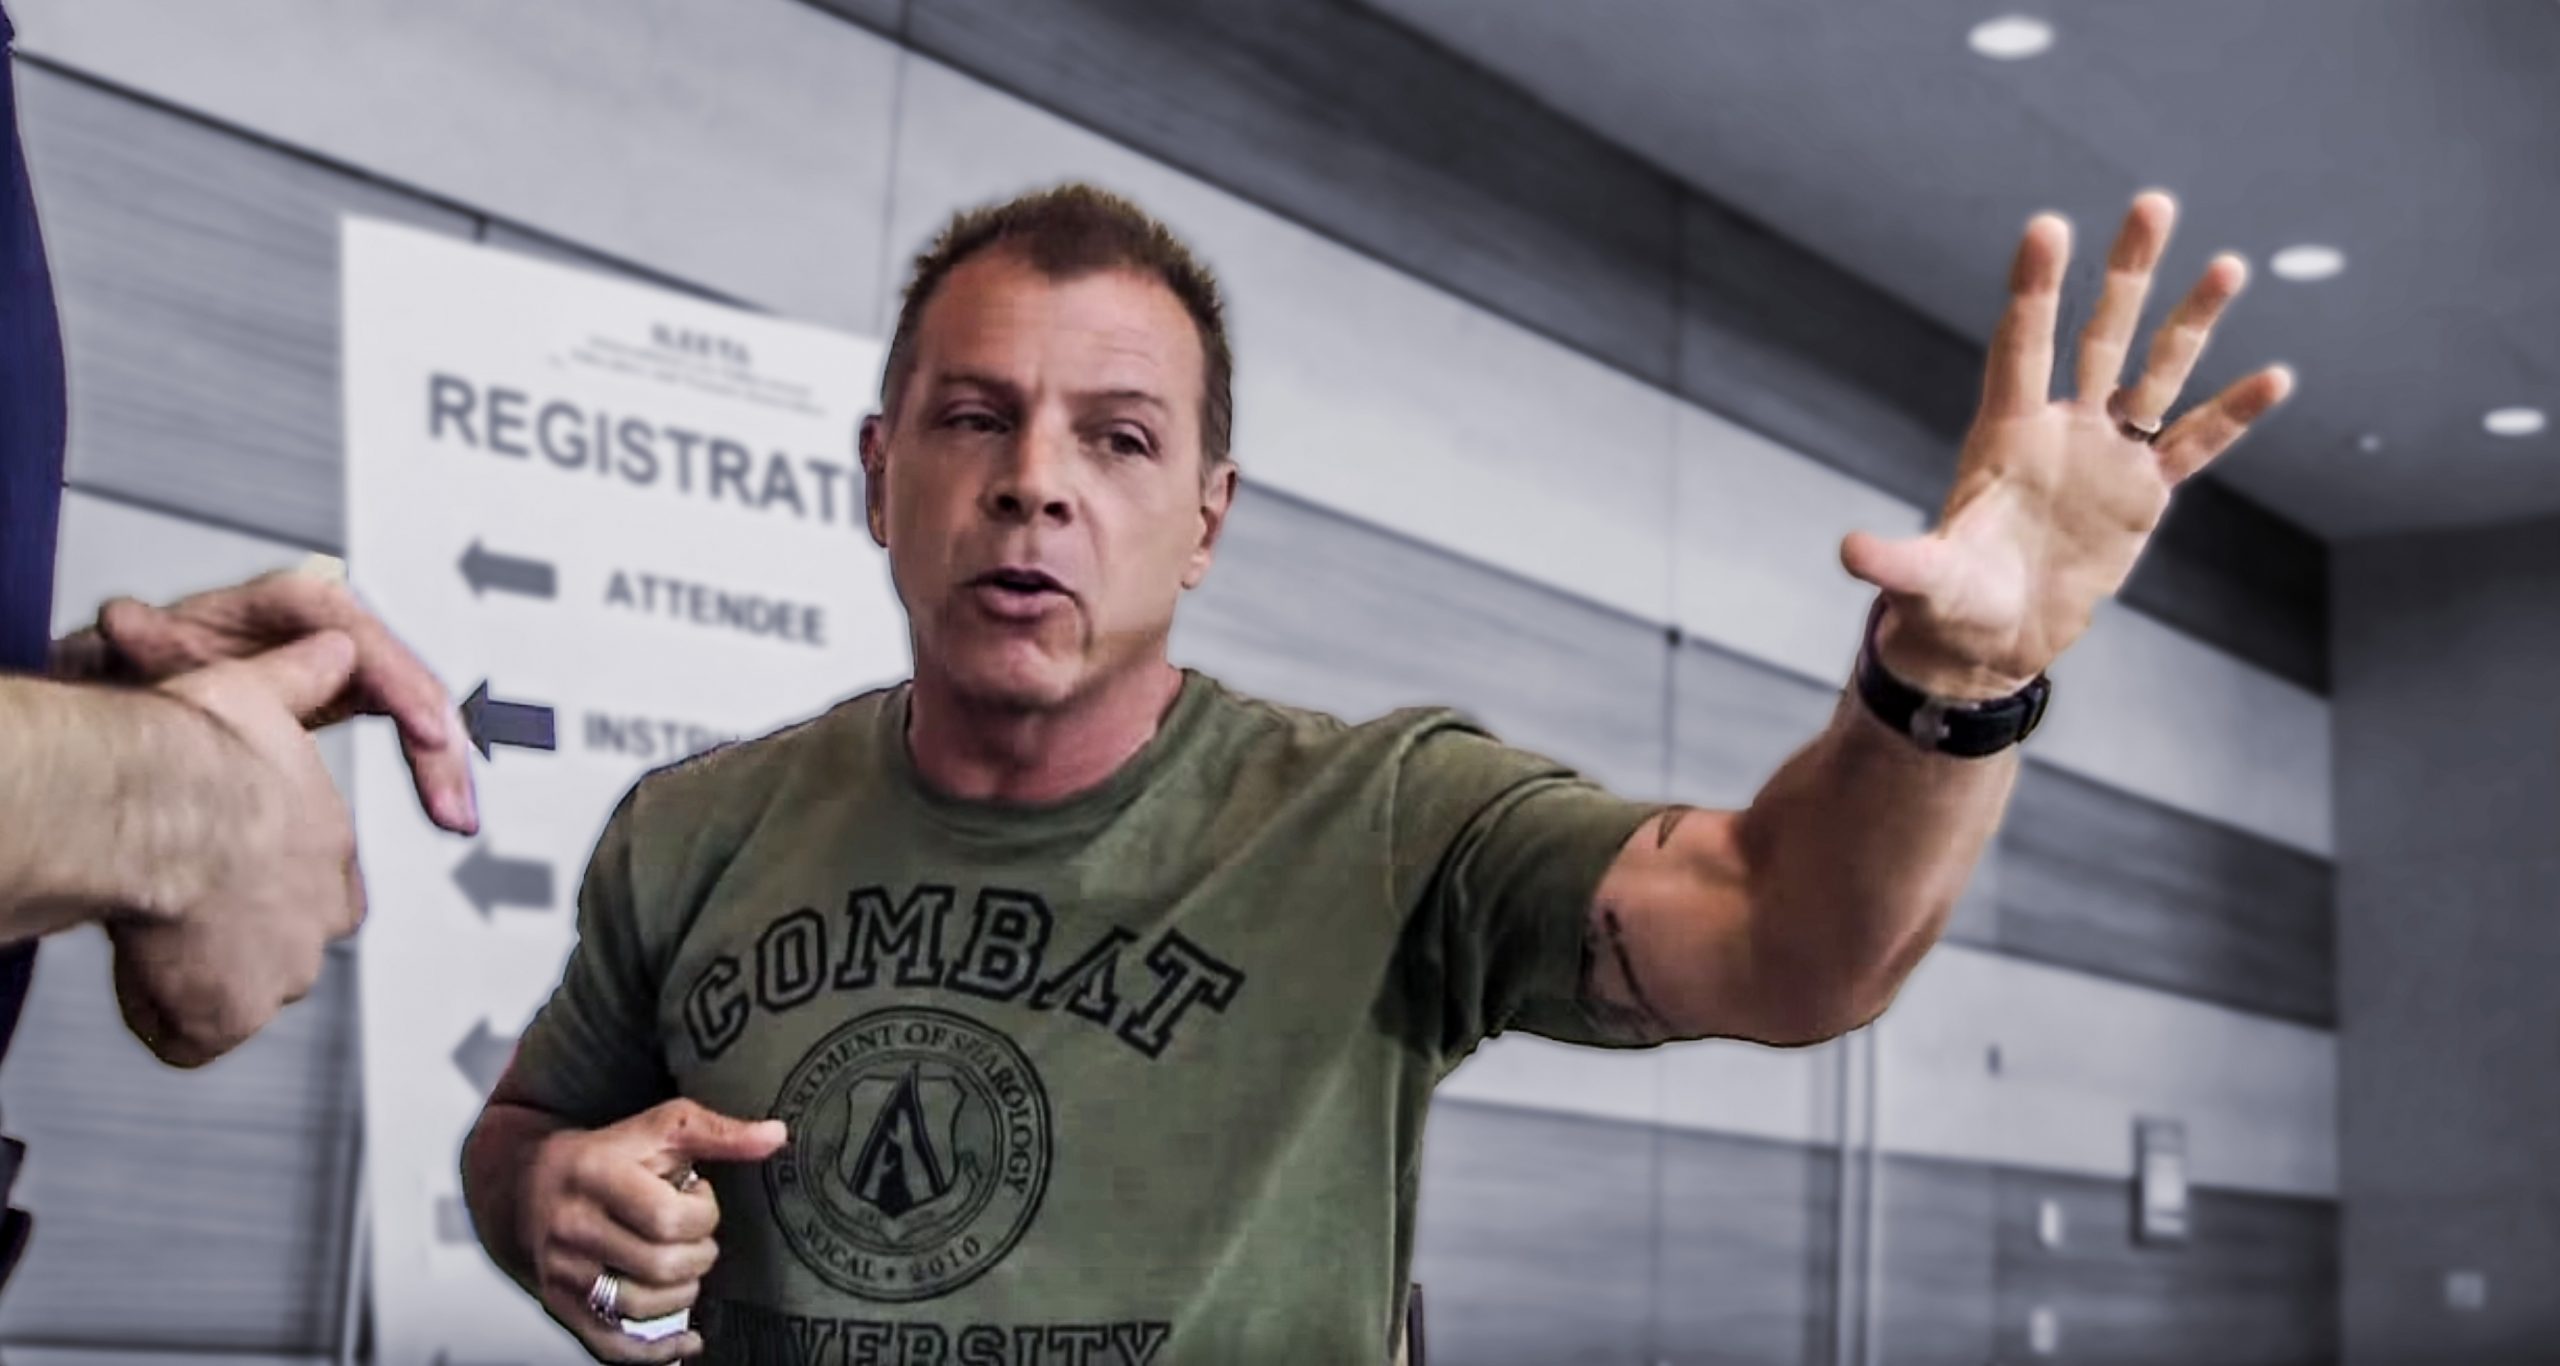 Tony Blauer on Primal, Protective, and Tactical Responses